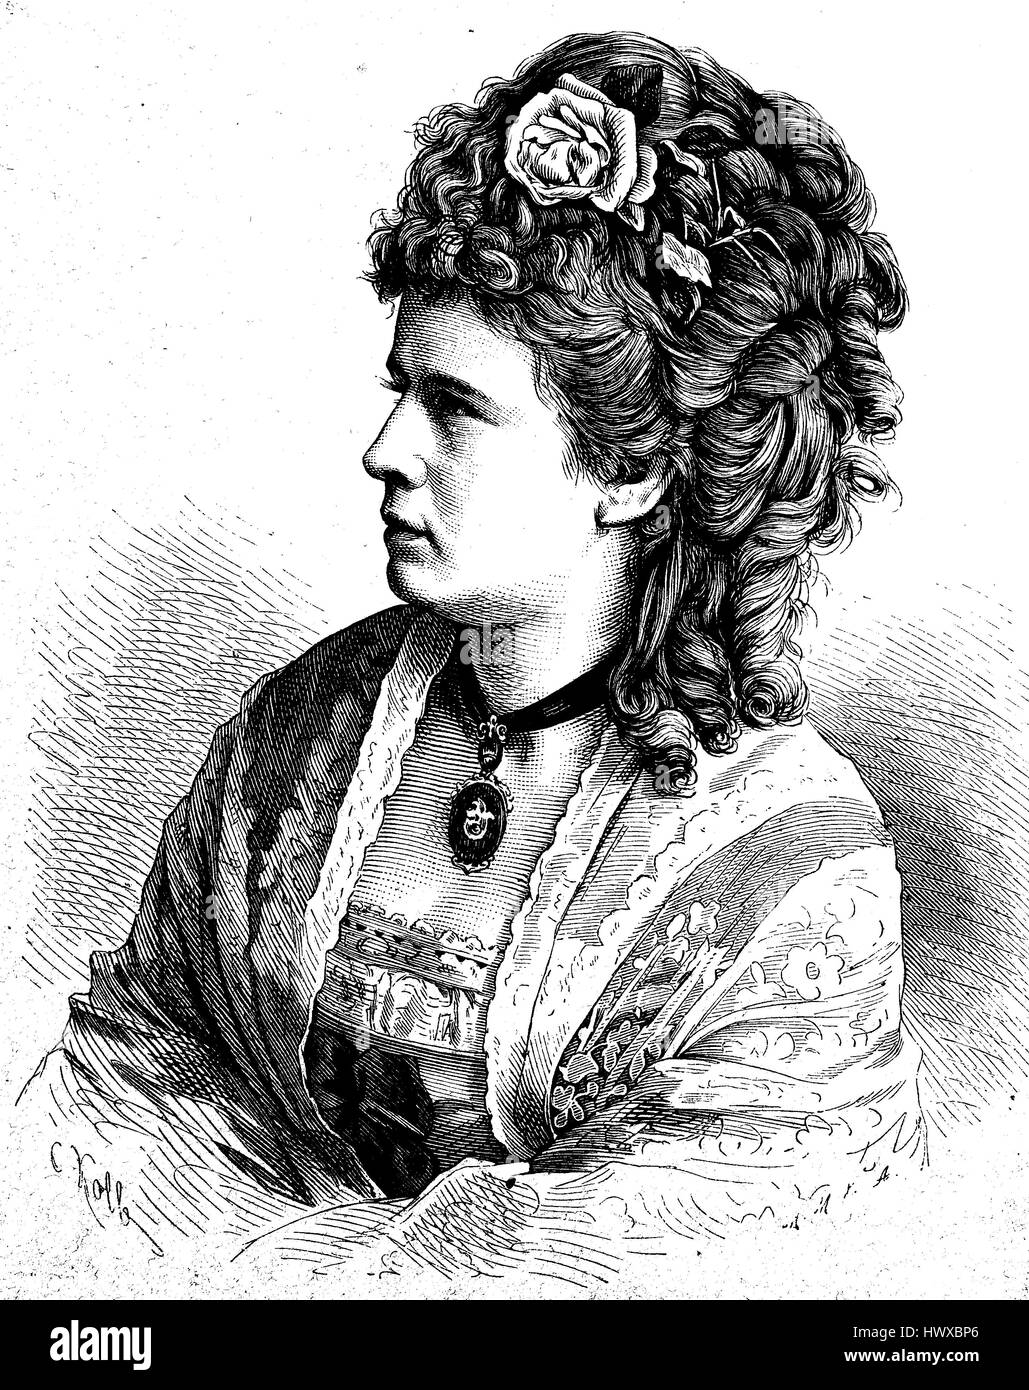 Anna Haverland, January 8, 1854 - May 31, 1908, was a German actress and also writer, Germany, reproduction of an image, woodcut from the year 1881, digital improved Stock Photo